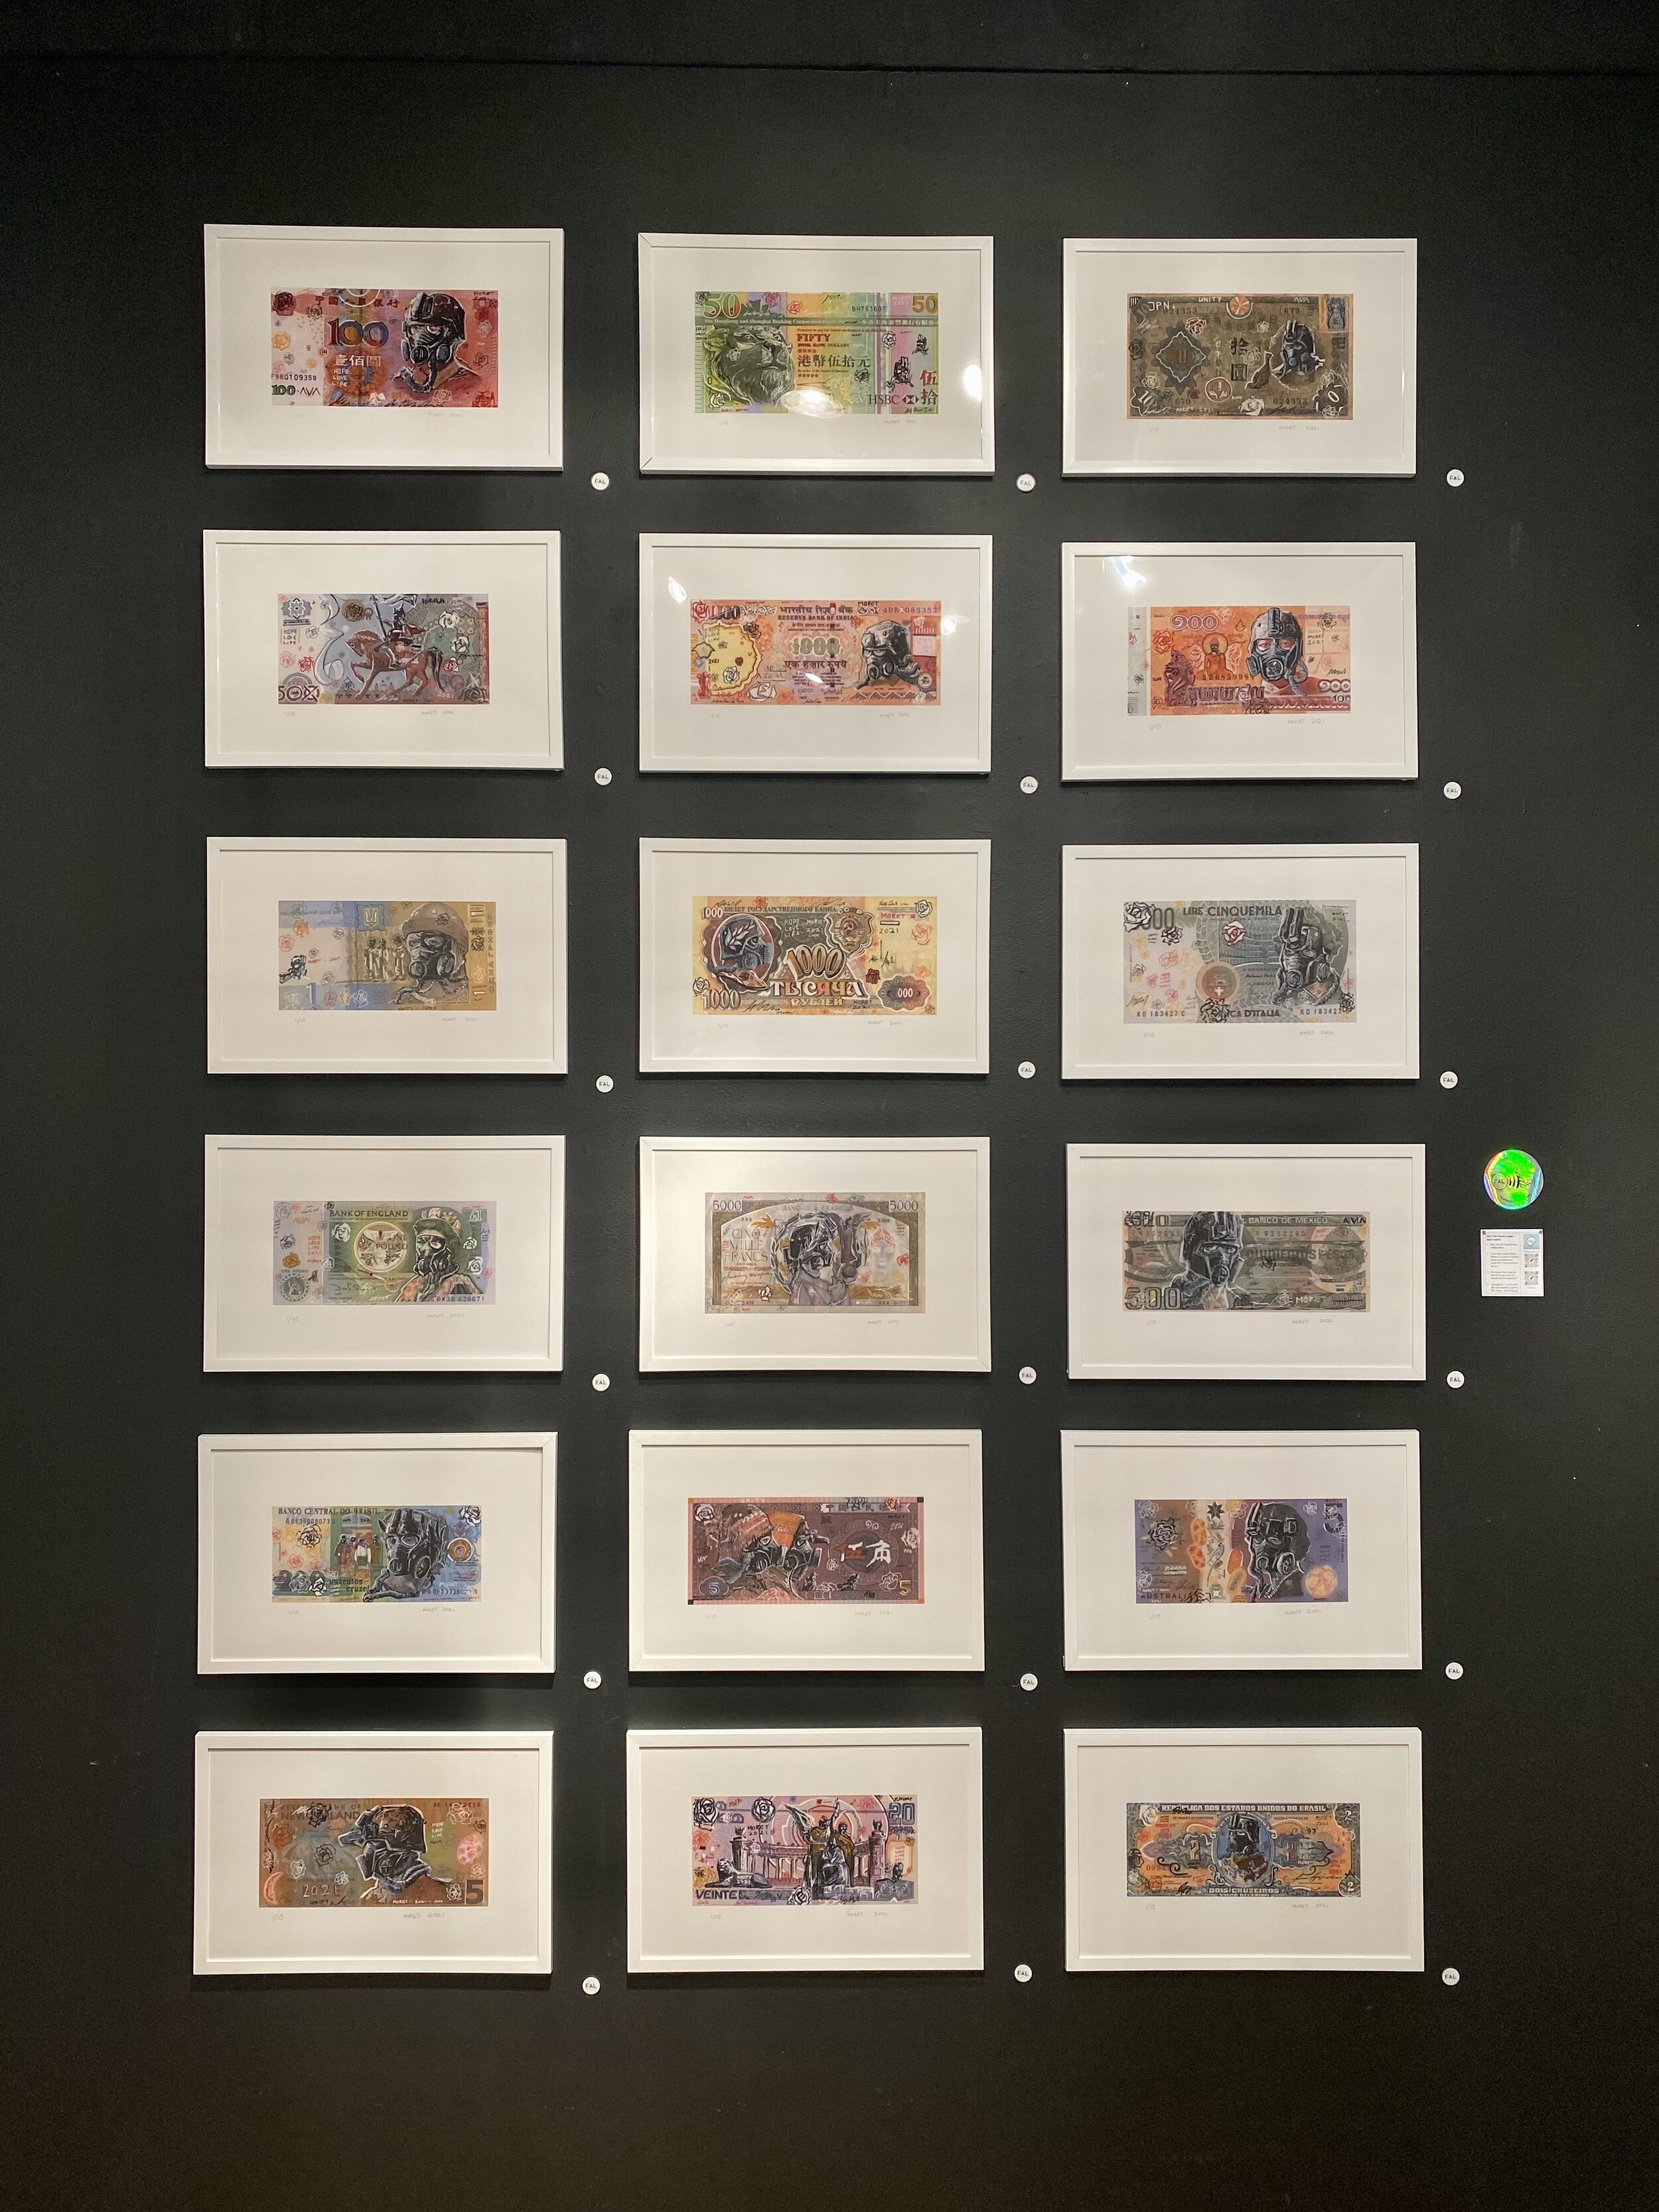 Installation View of "Quarantine Currency"